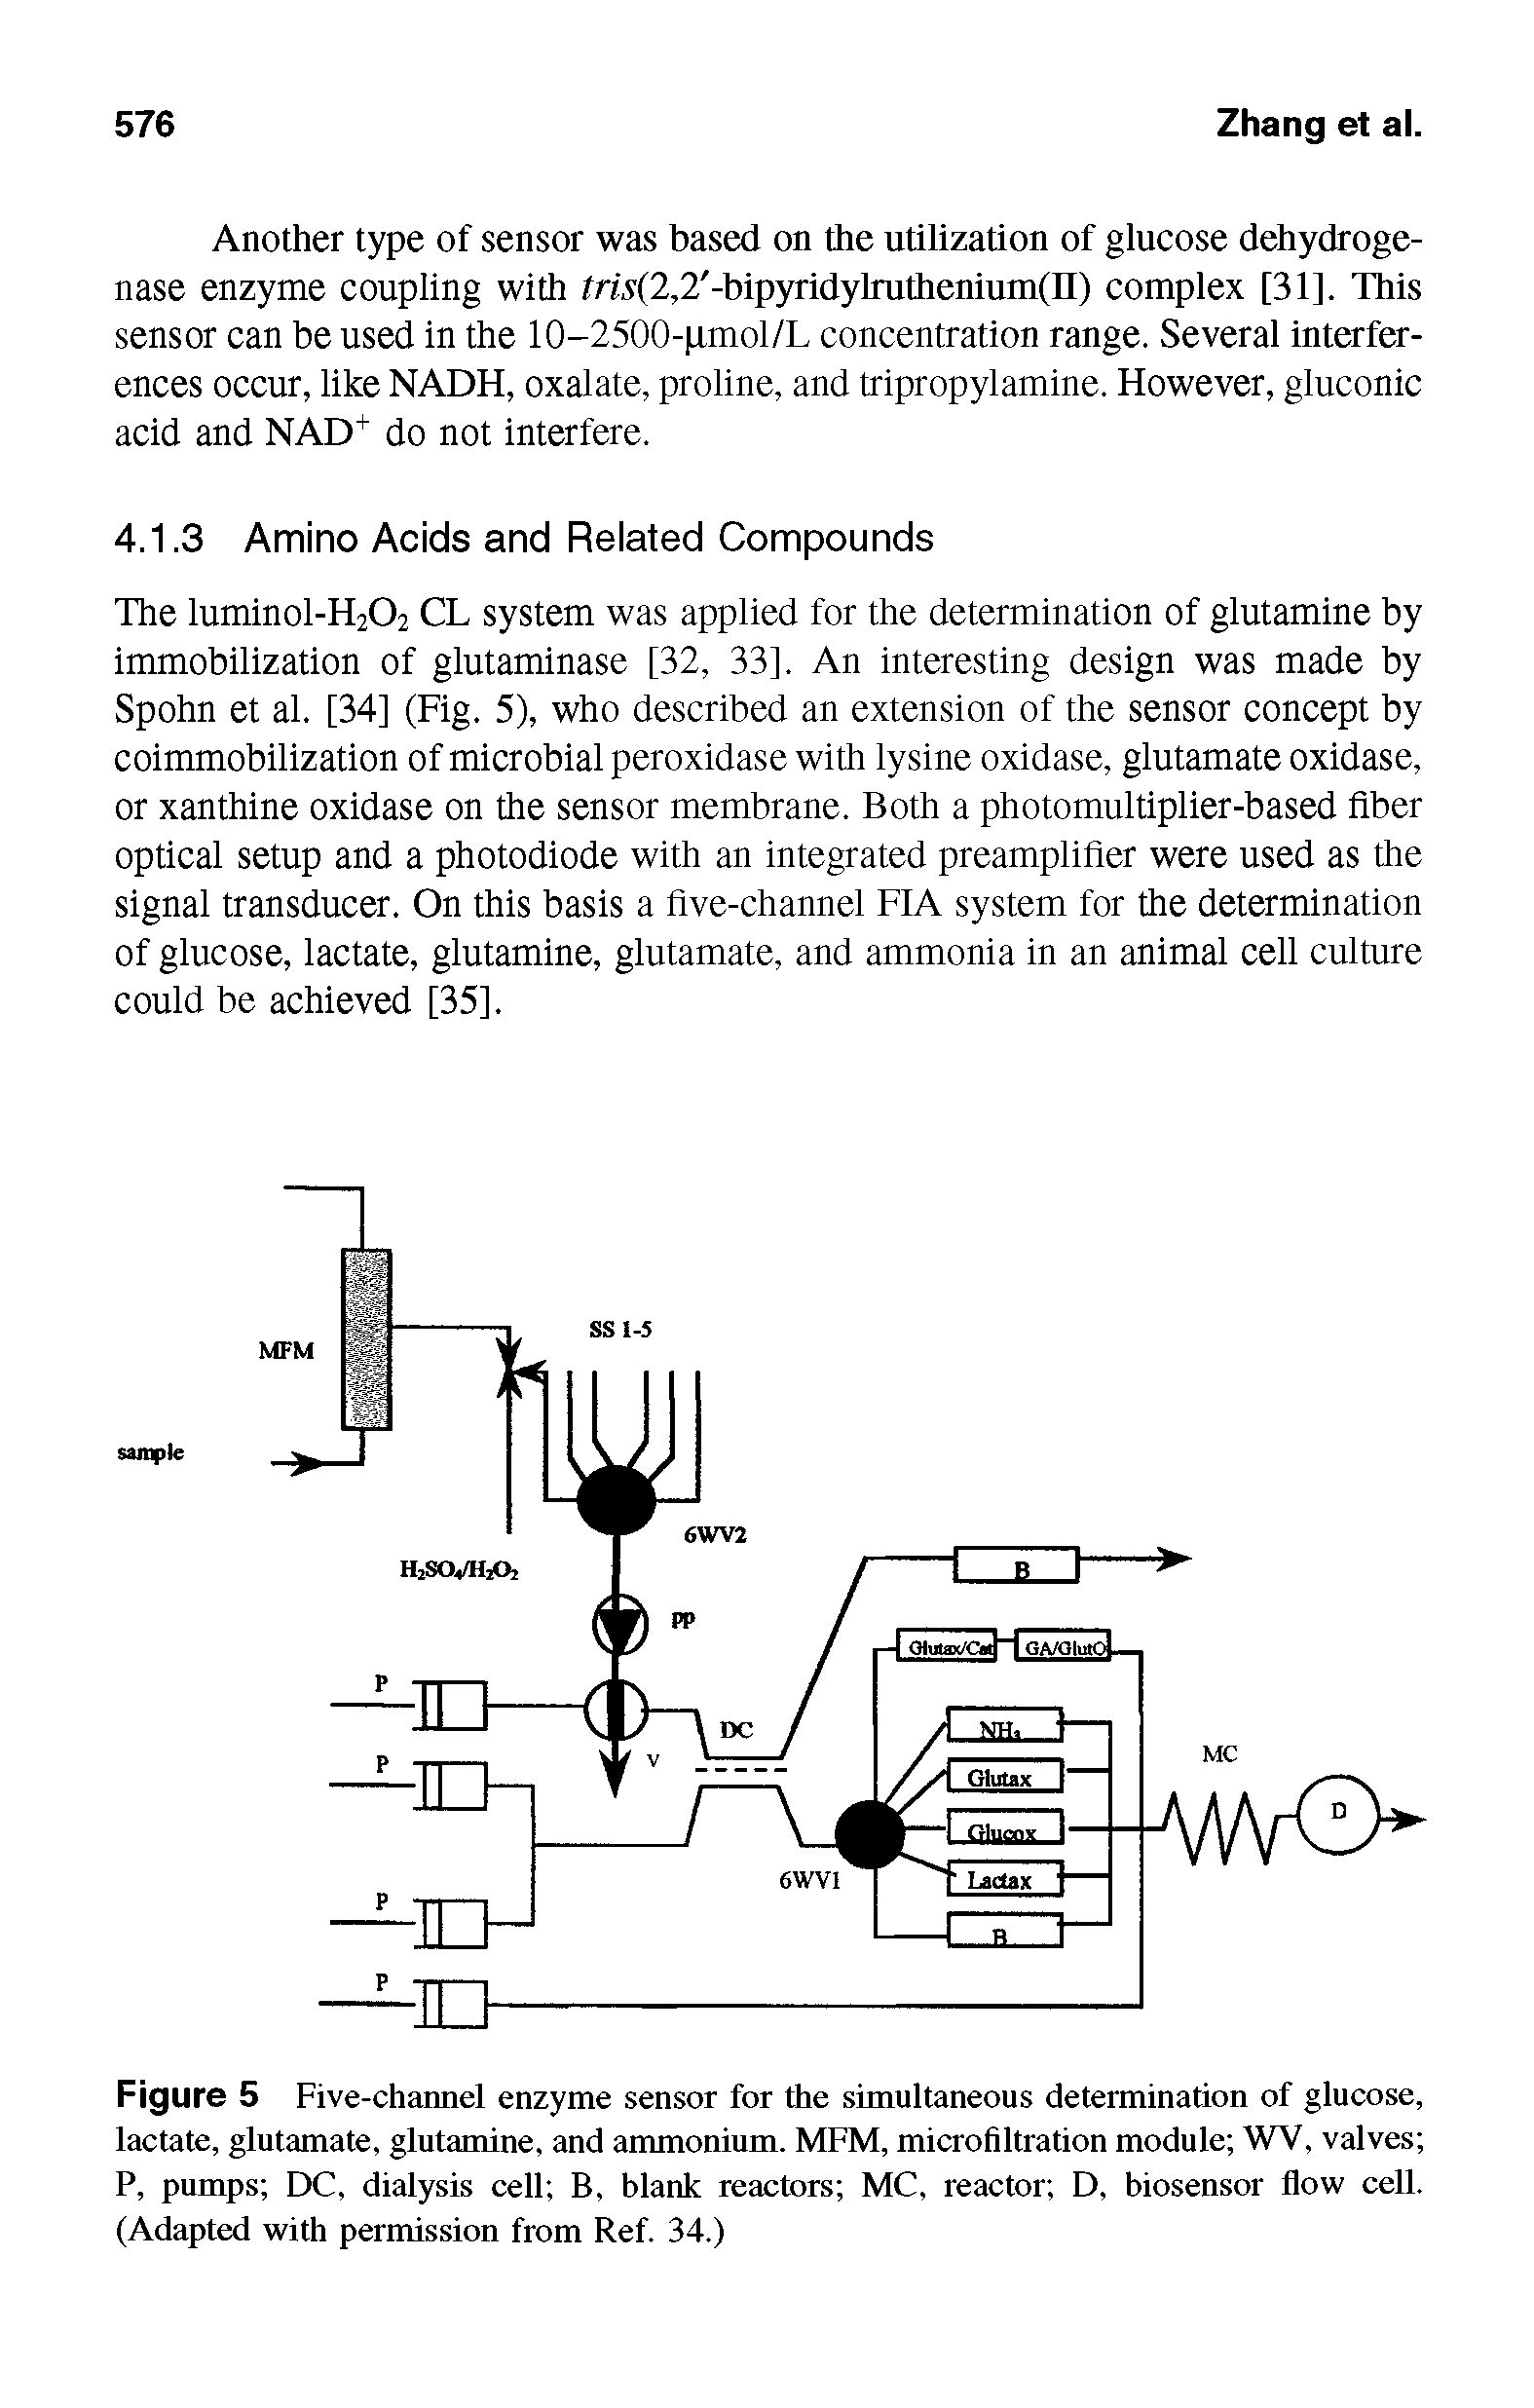 Figure 5 Five-channel enzyme sensor for the simultaneous determination of glucose, lactate, glutamate, glutamine, and ammonium. MFM, microfiltration module WV, valves P, pumps DC, dialysis cell B, blank reactors MC, reactor D, biosensor flow cell. (Adapted with permission from Ref. 34.)...